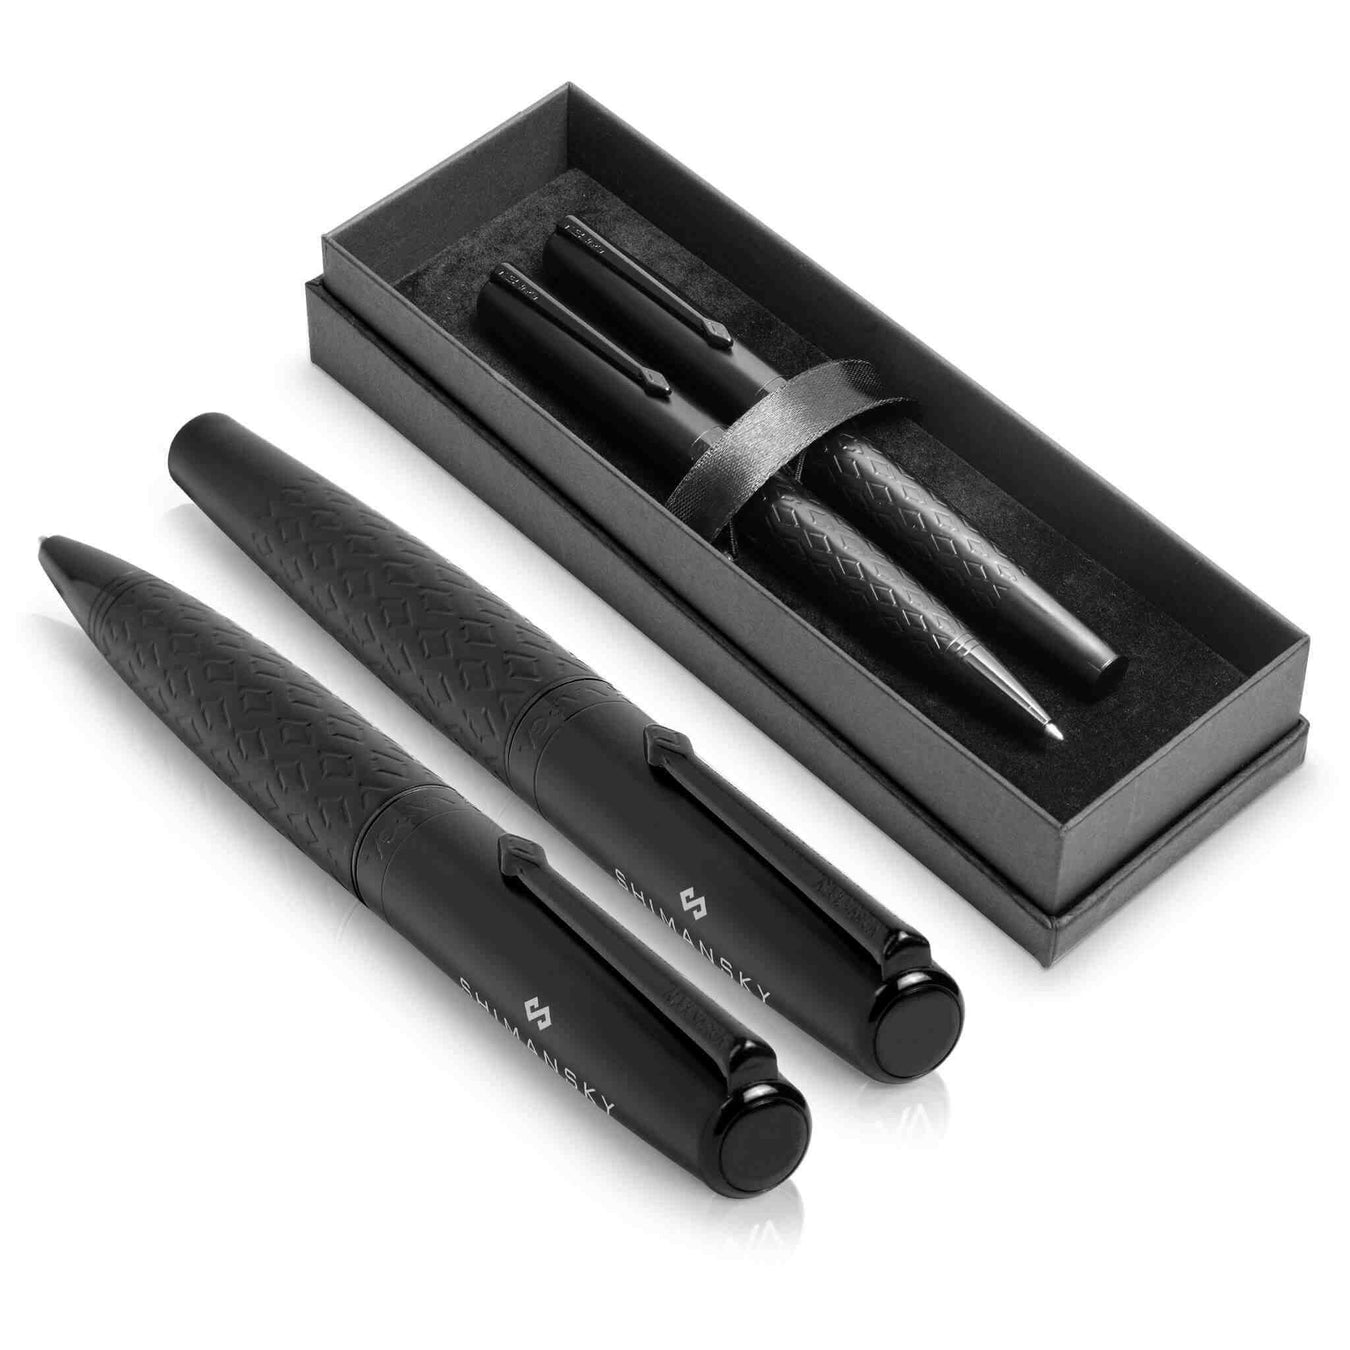 A set of luxury metal pens in formal black presented both in a box and outside the packaging